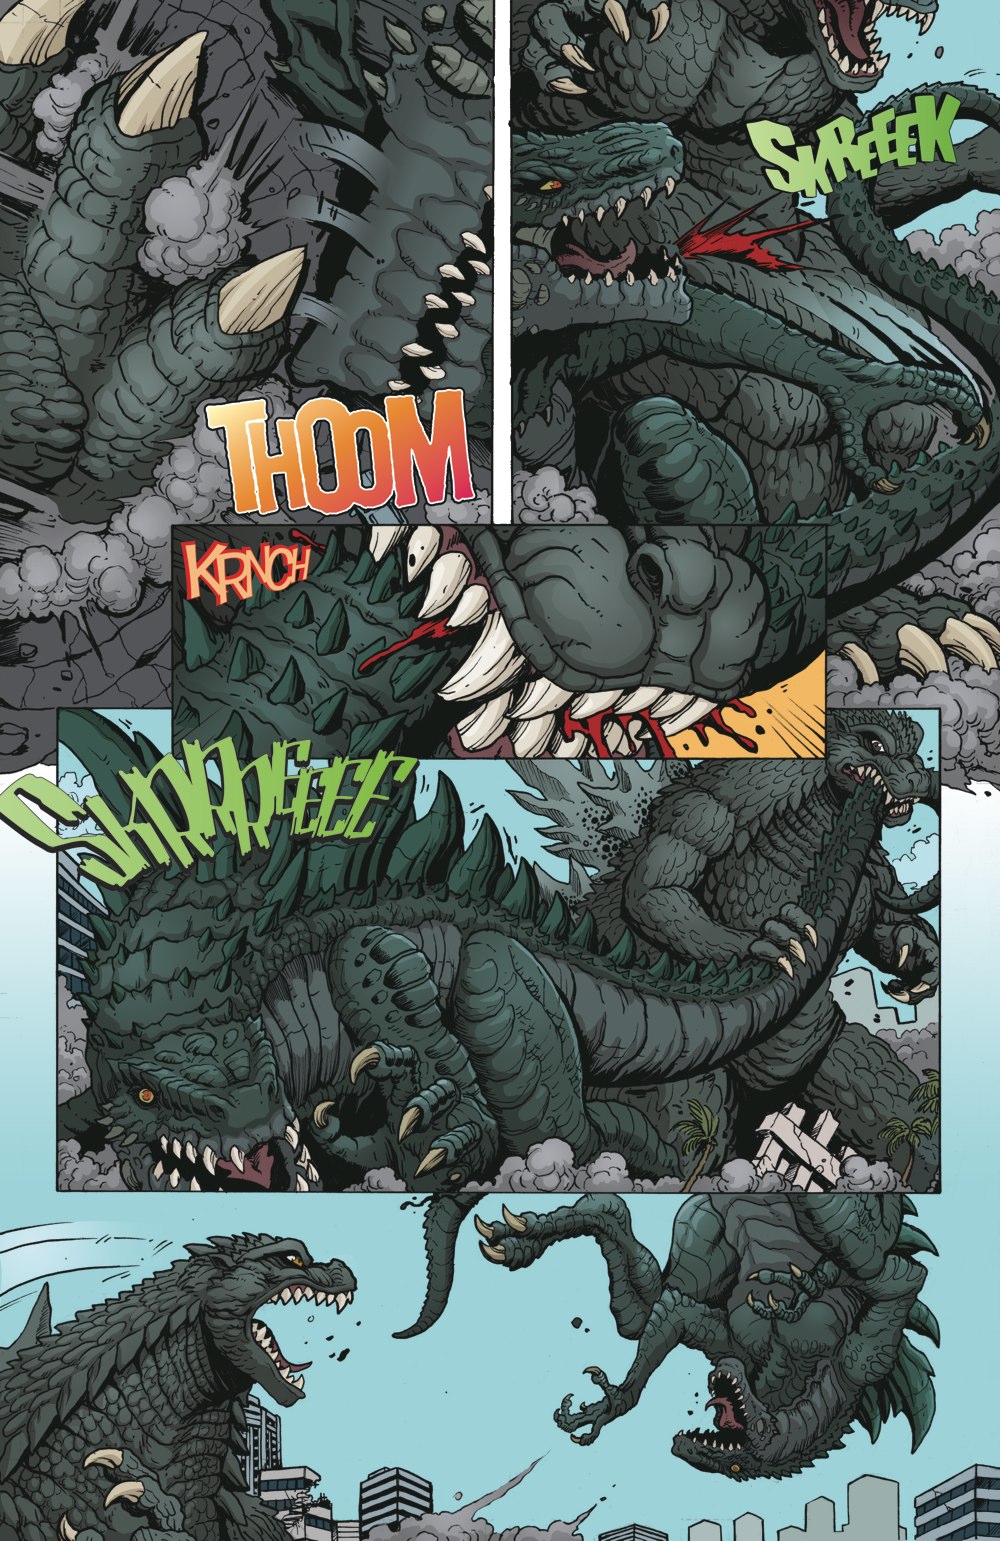 Godzilla: Rulers of Earth #2 Review